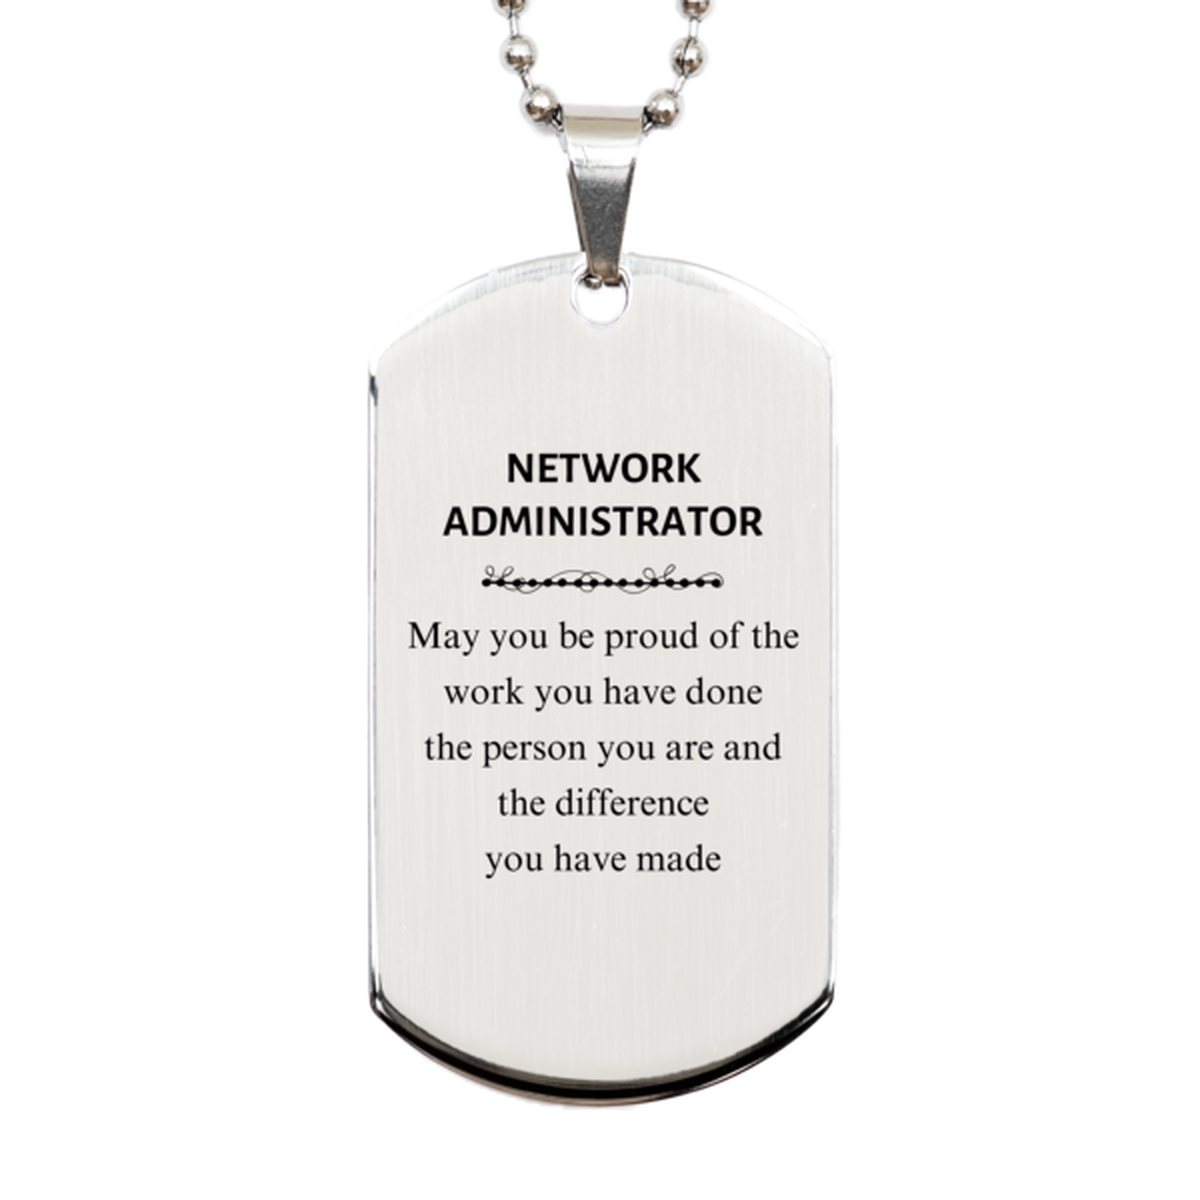 Network Administrator May you be proud of the work you have done, Retirement Network Administrator Silver Dog Tag for Colleague Appreciation Gifts Amazing for Network Administrator